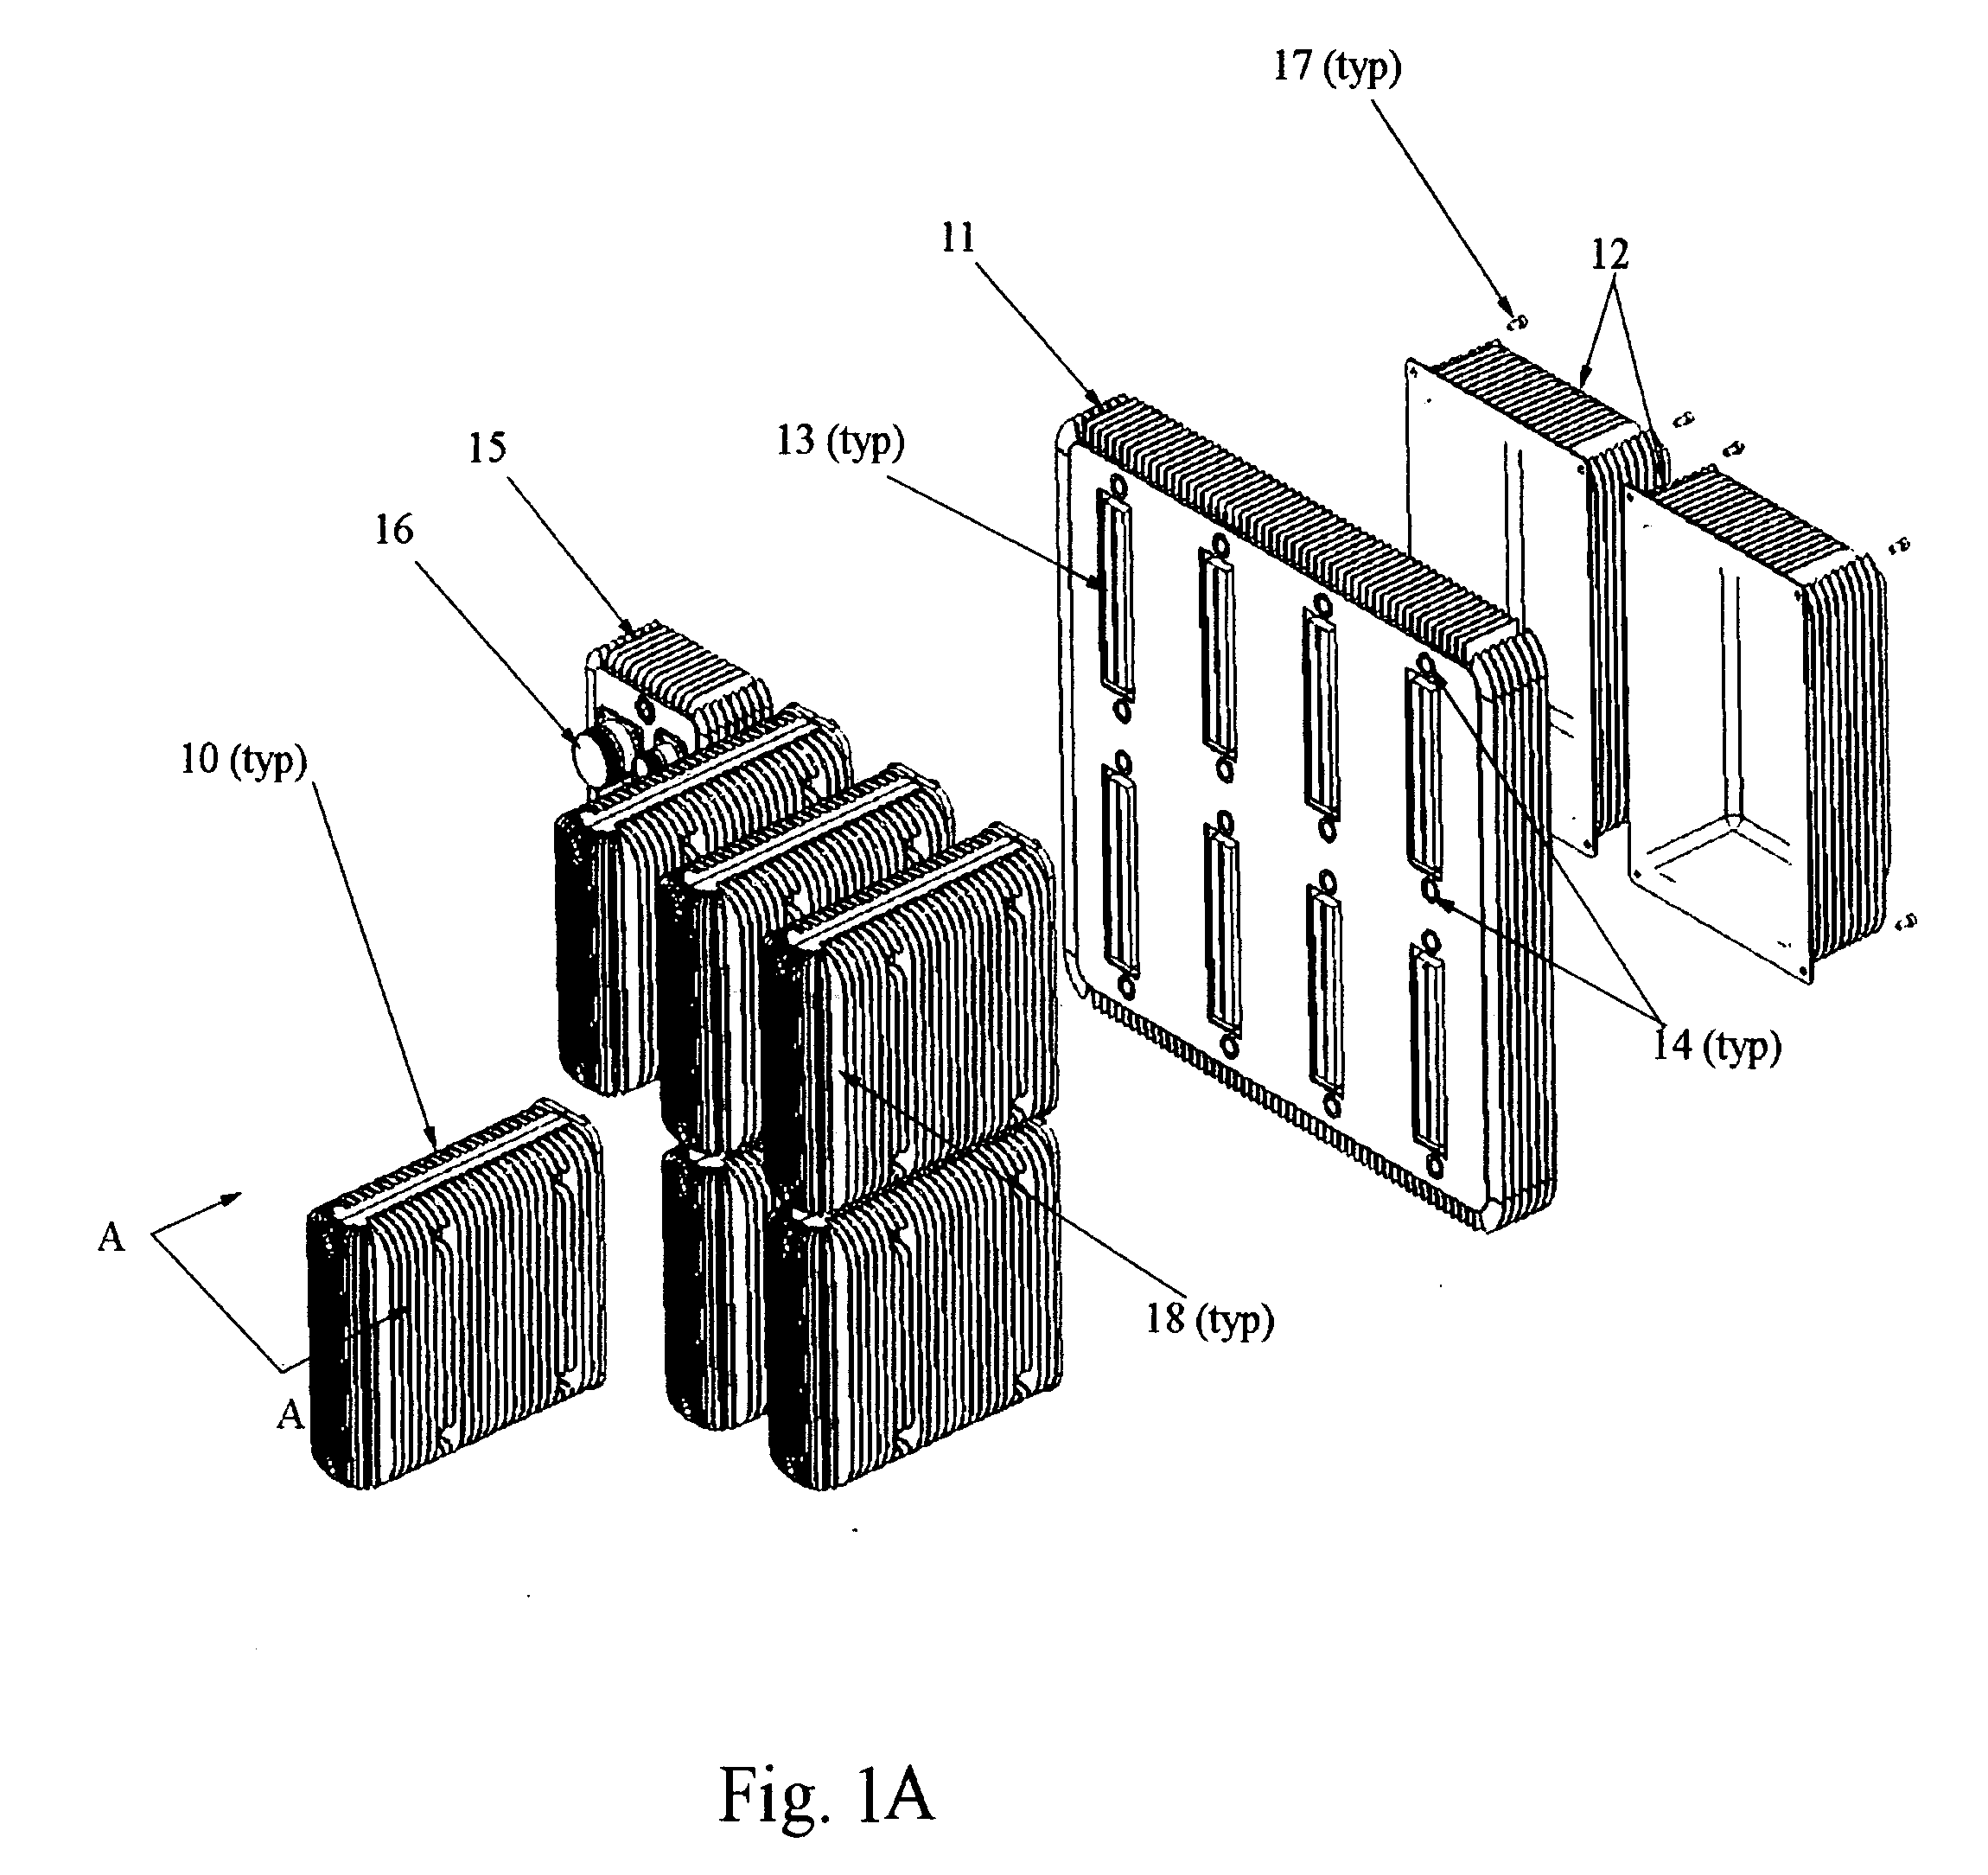 Machine for passively removing heat generated by an electronic circuit board